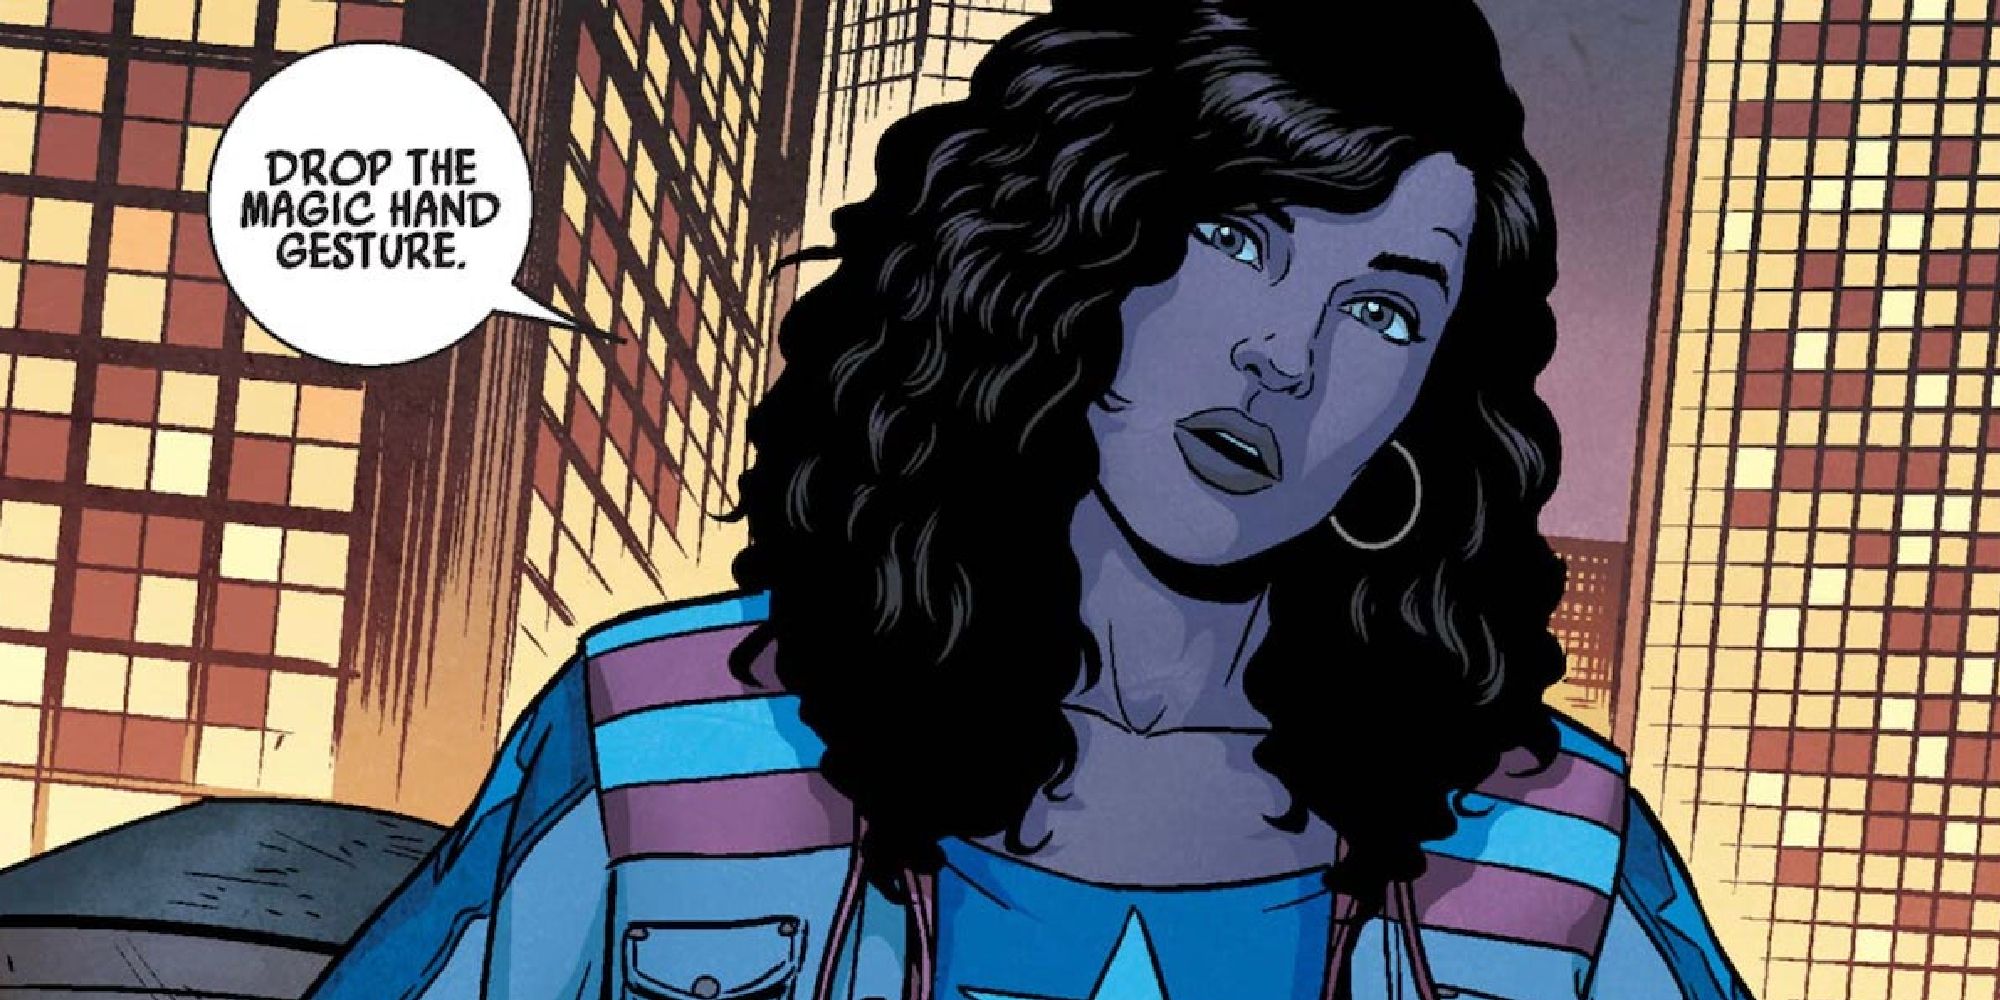 America Chavez on a rooftop at night saying "Drop the magic hand gesture."